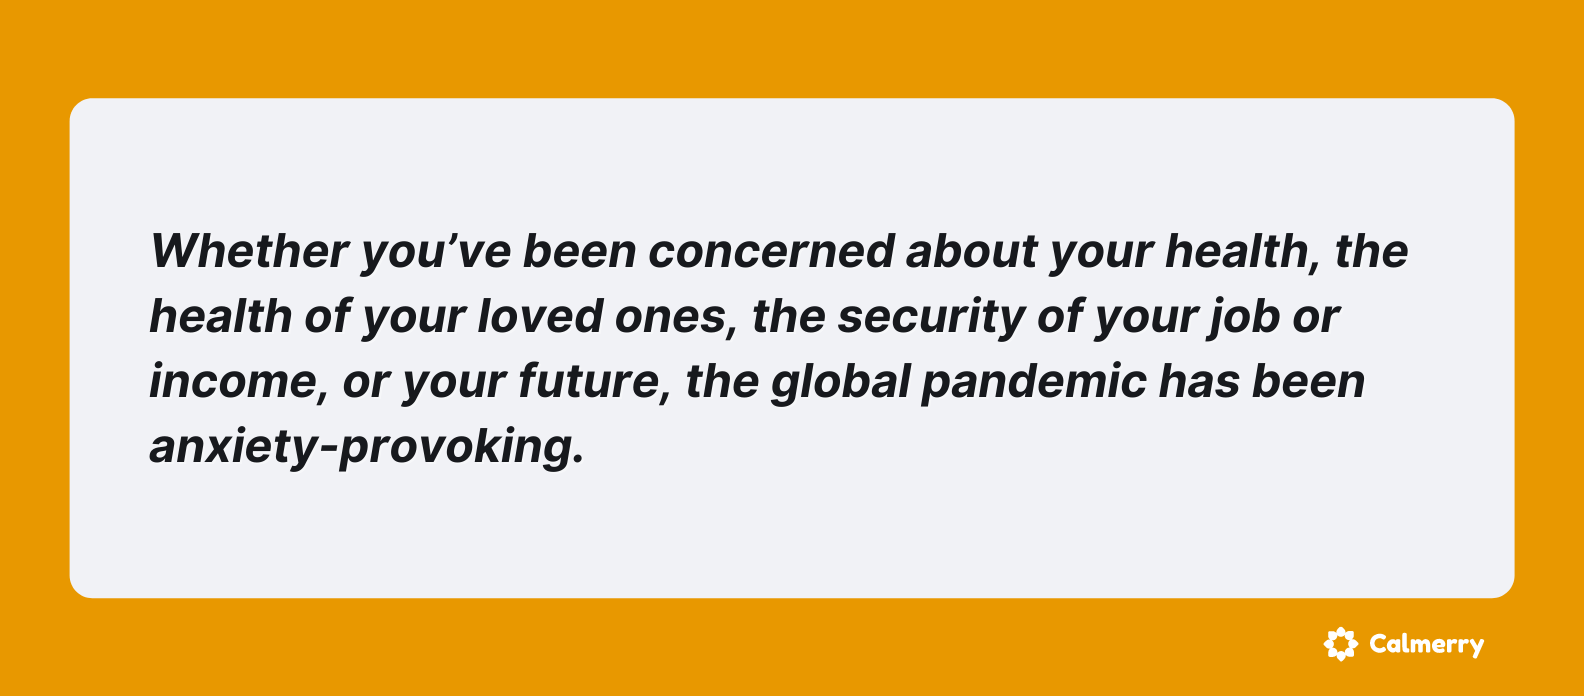 Whether you’ve been concerned about your health, the health of your loved ones, the security of your job or income, or your future, the global pandemic has been anxiety-provoking.